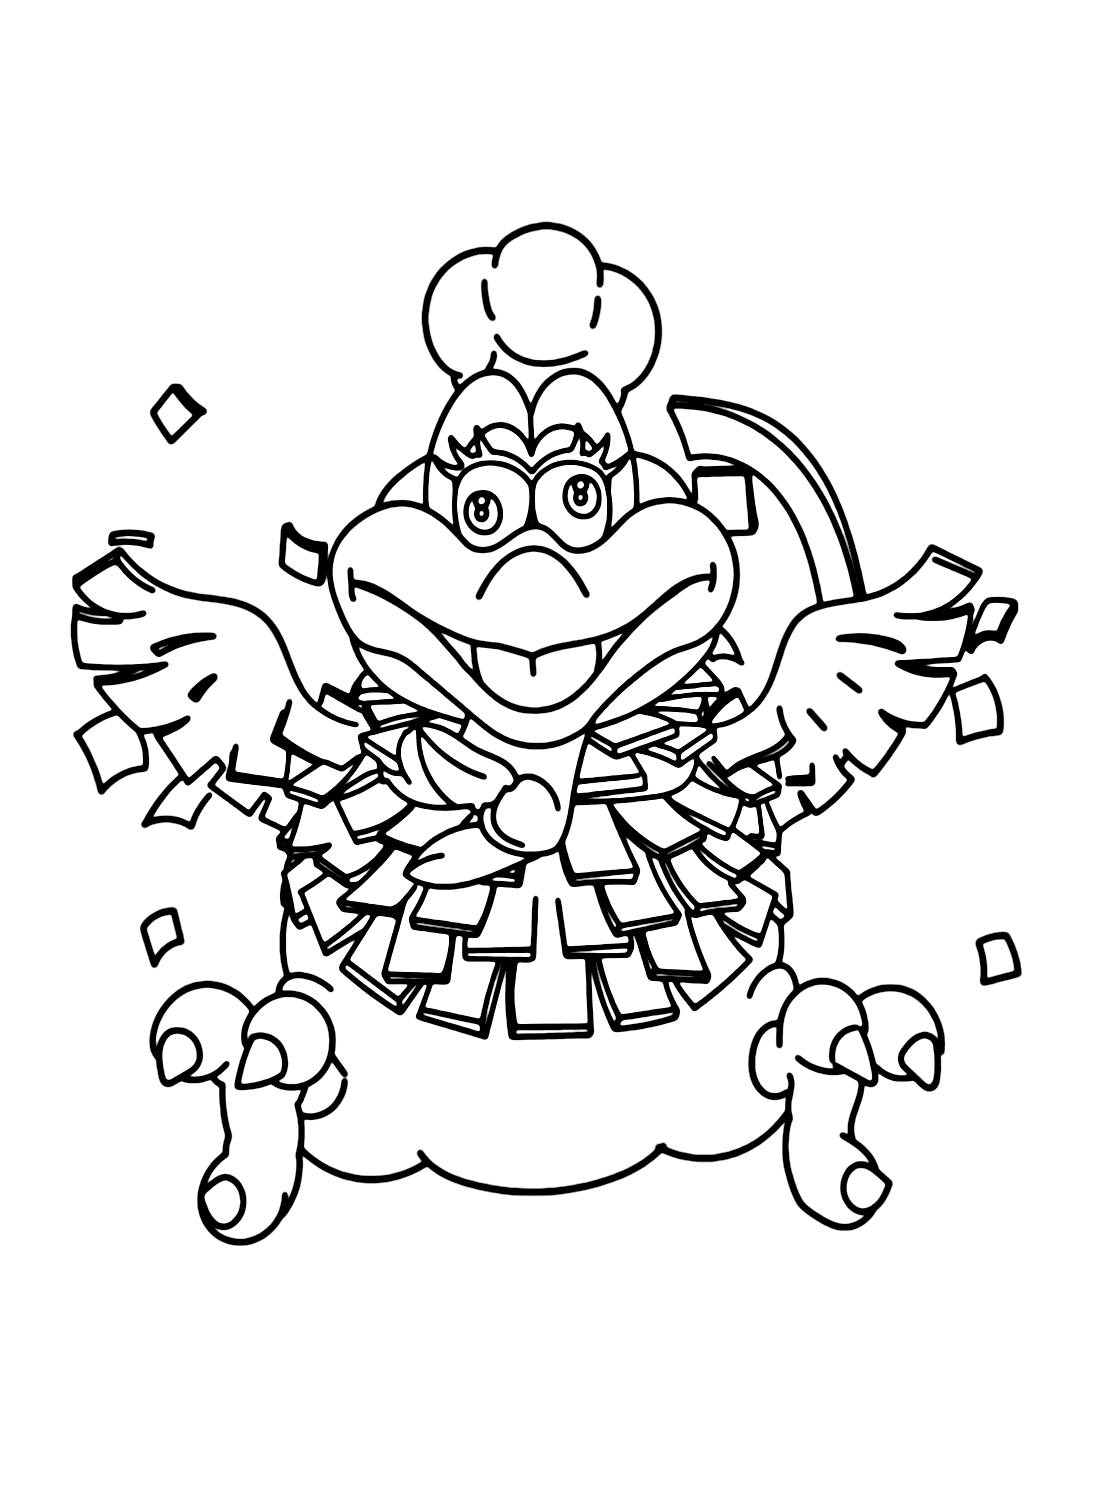 Cookatiel from Super Mario Odyssey Coloring Page